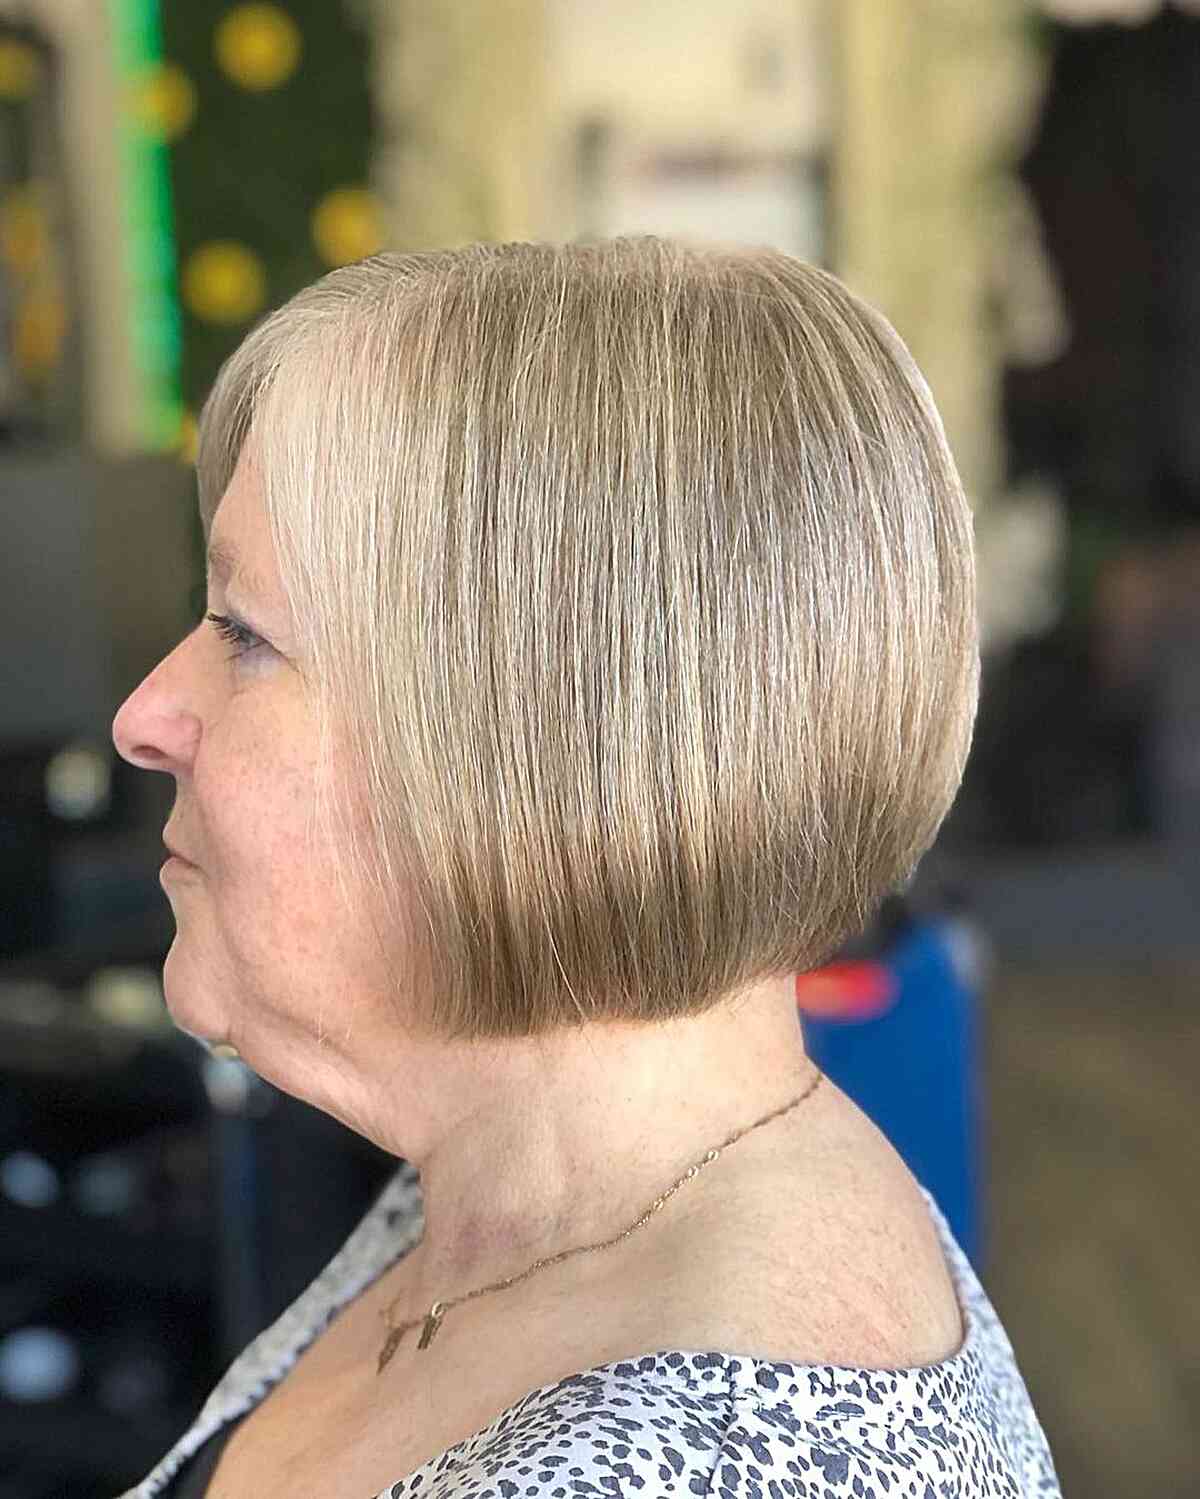 Jawline Sleek Bob with Blunt Ends for Mature Women Over 60